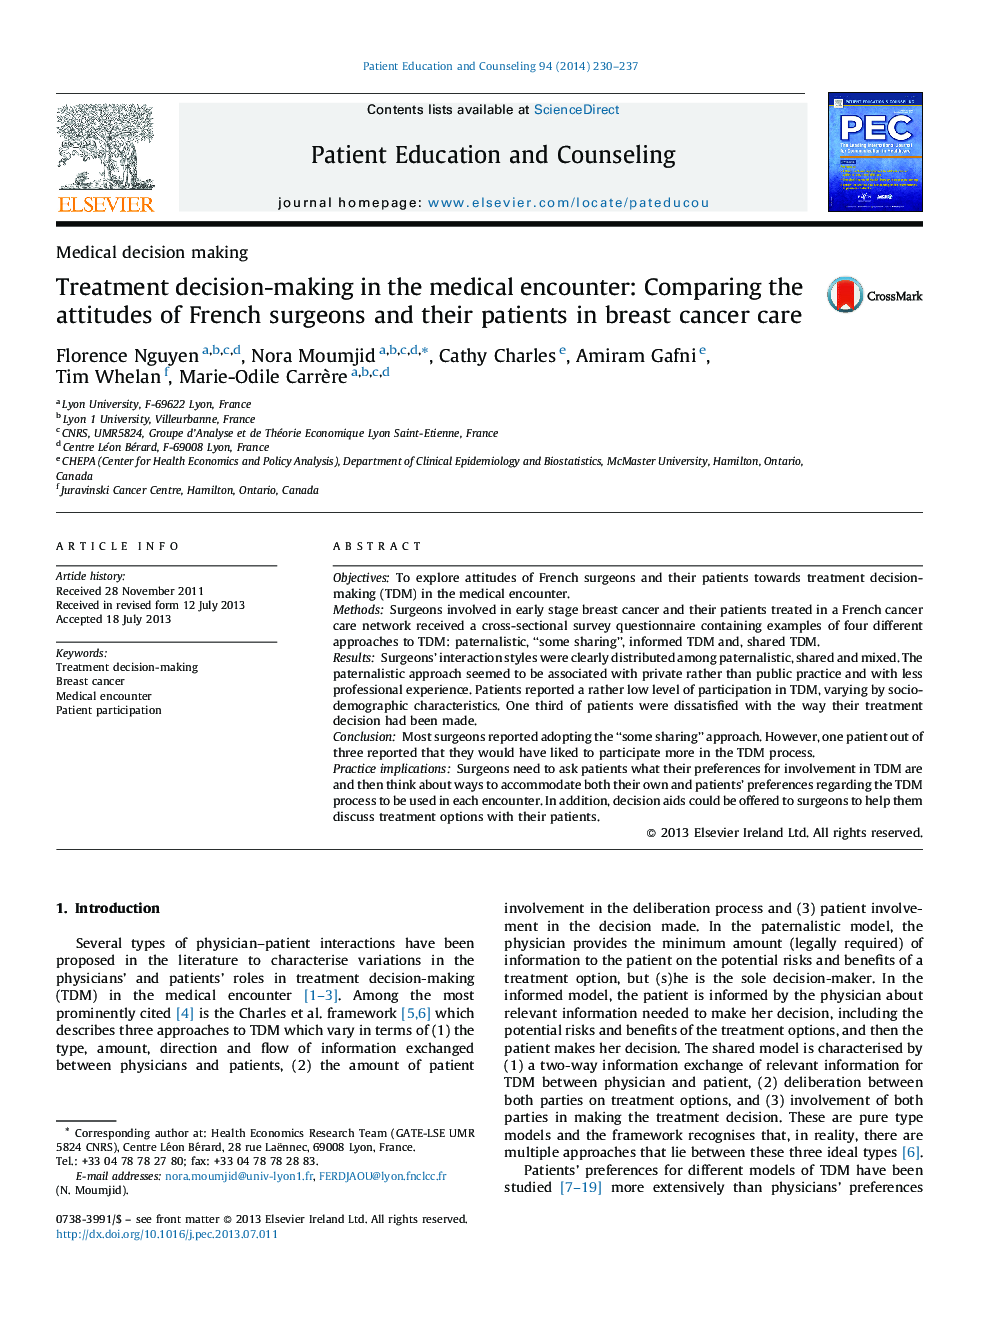 Treatment decision-making in the medical encounter: Comparing the attitudes of French surgeons and their patients in breast cancer care